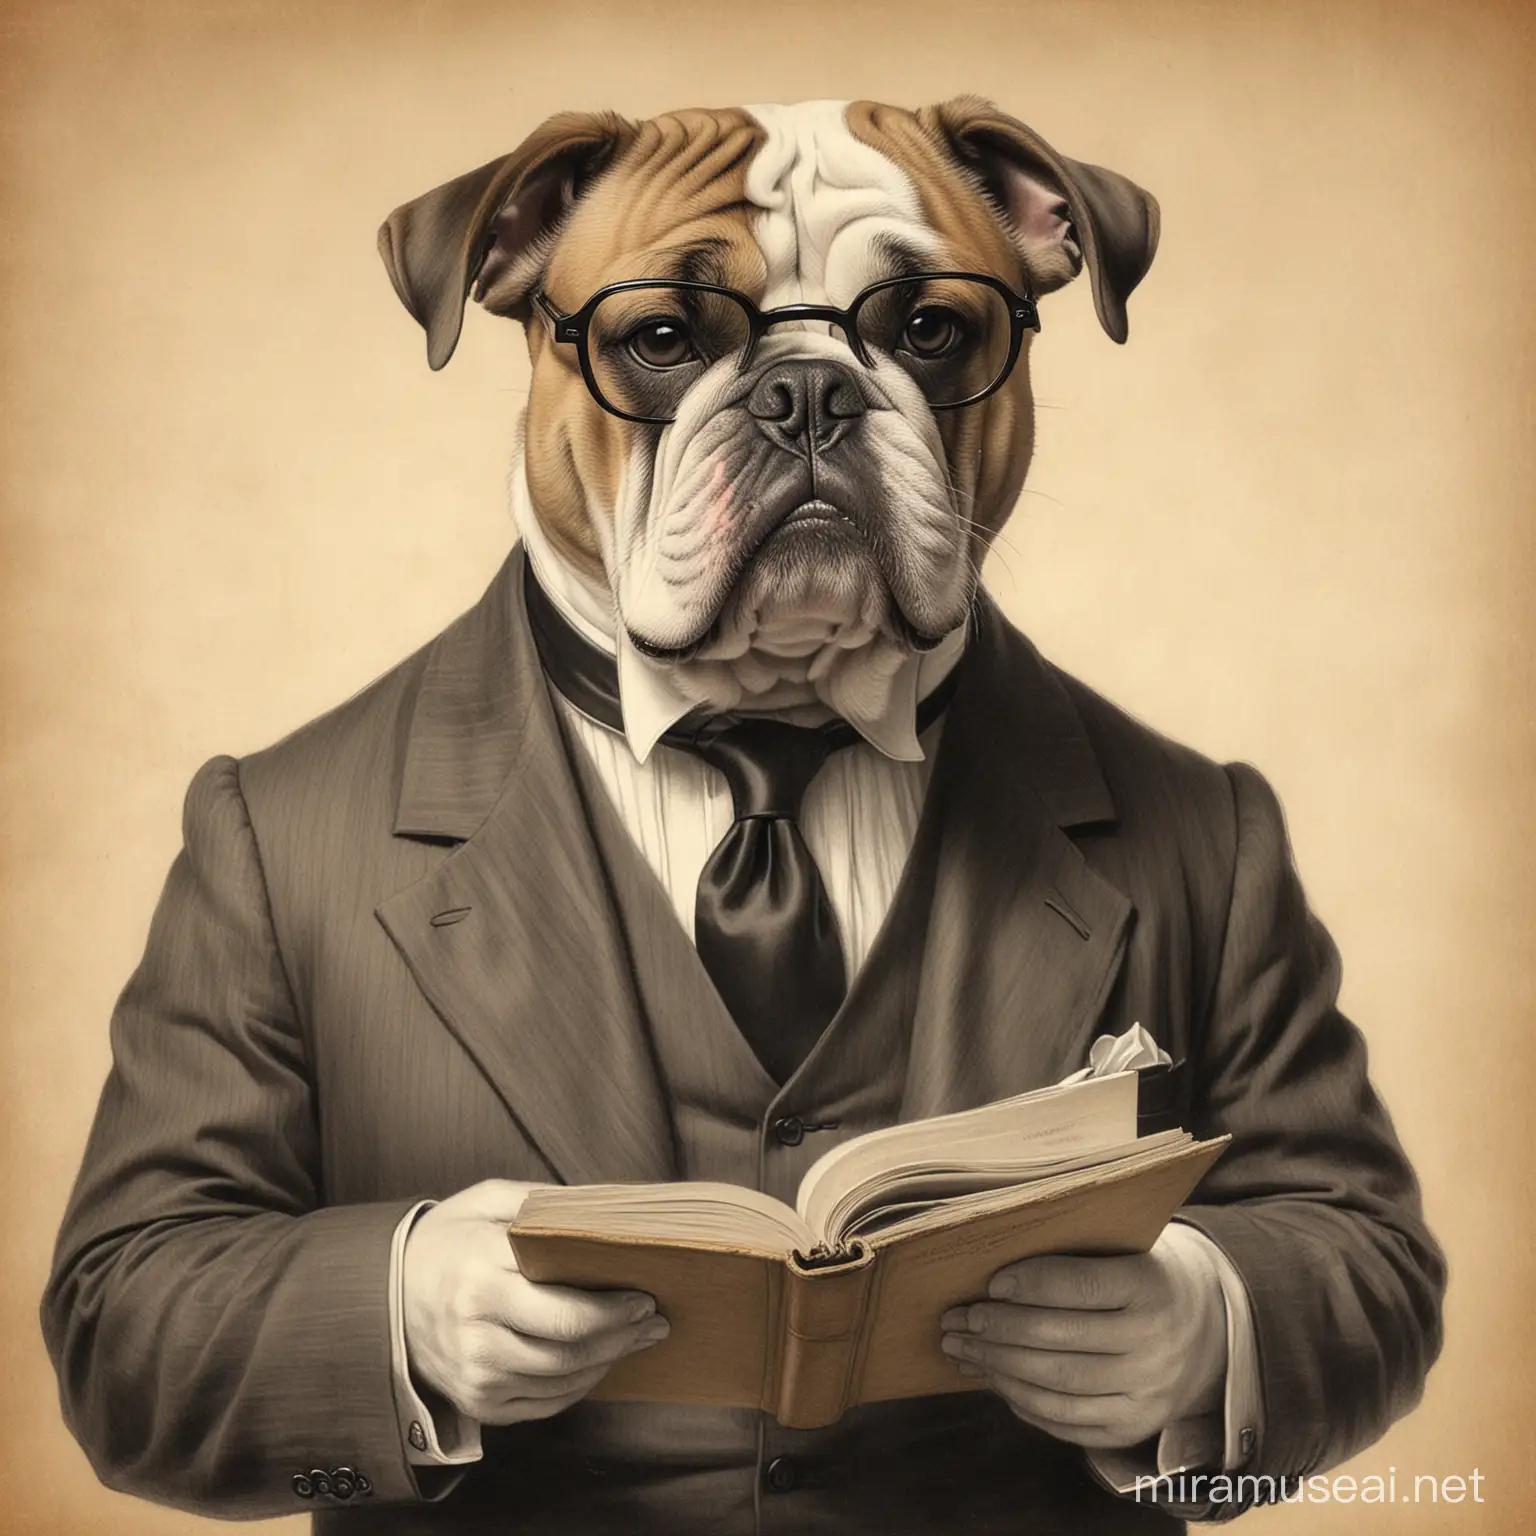 A victorian era charcoal sketch of a dignified bulldog wearing a suit and reading glasses
